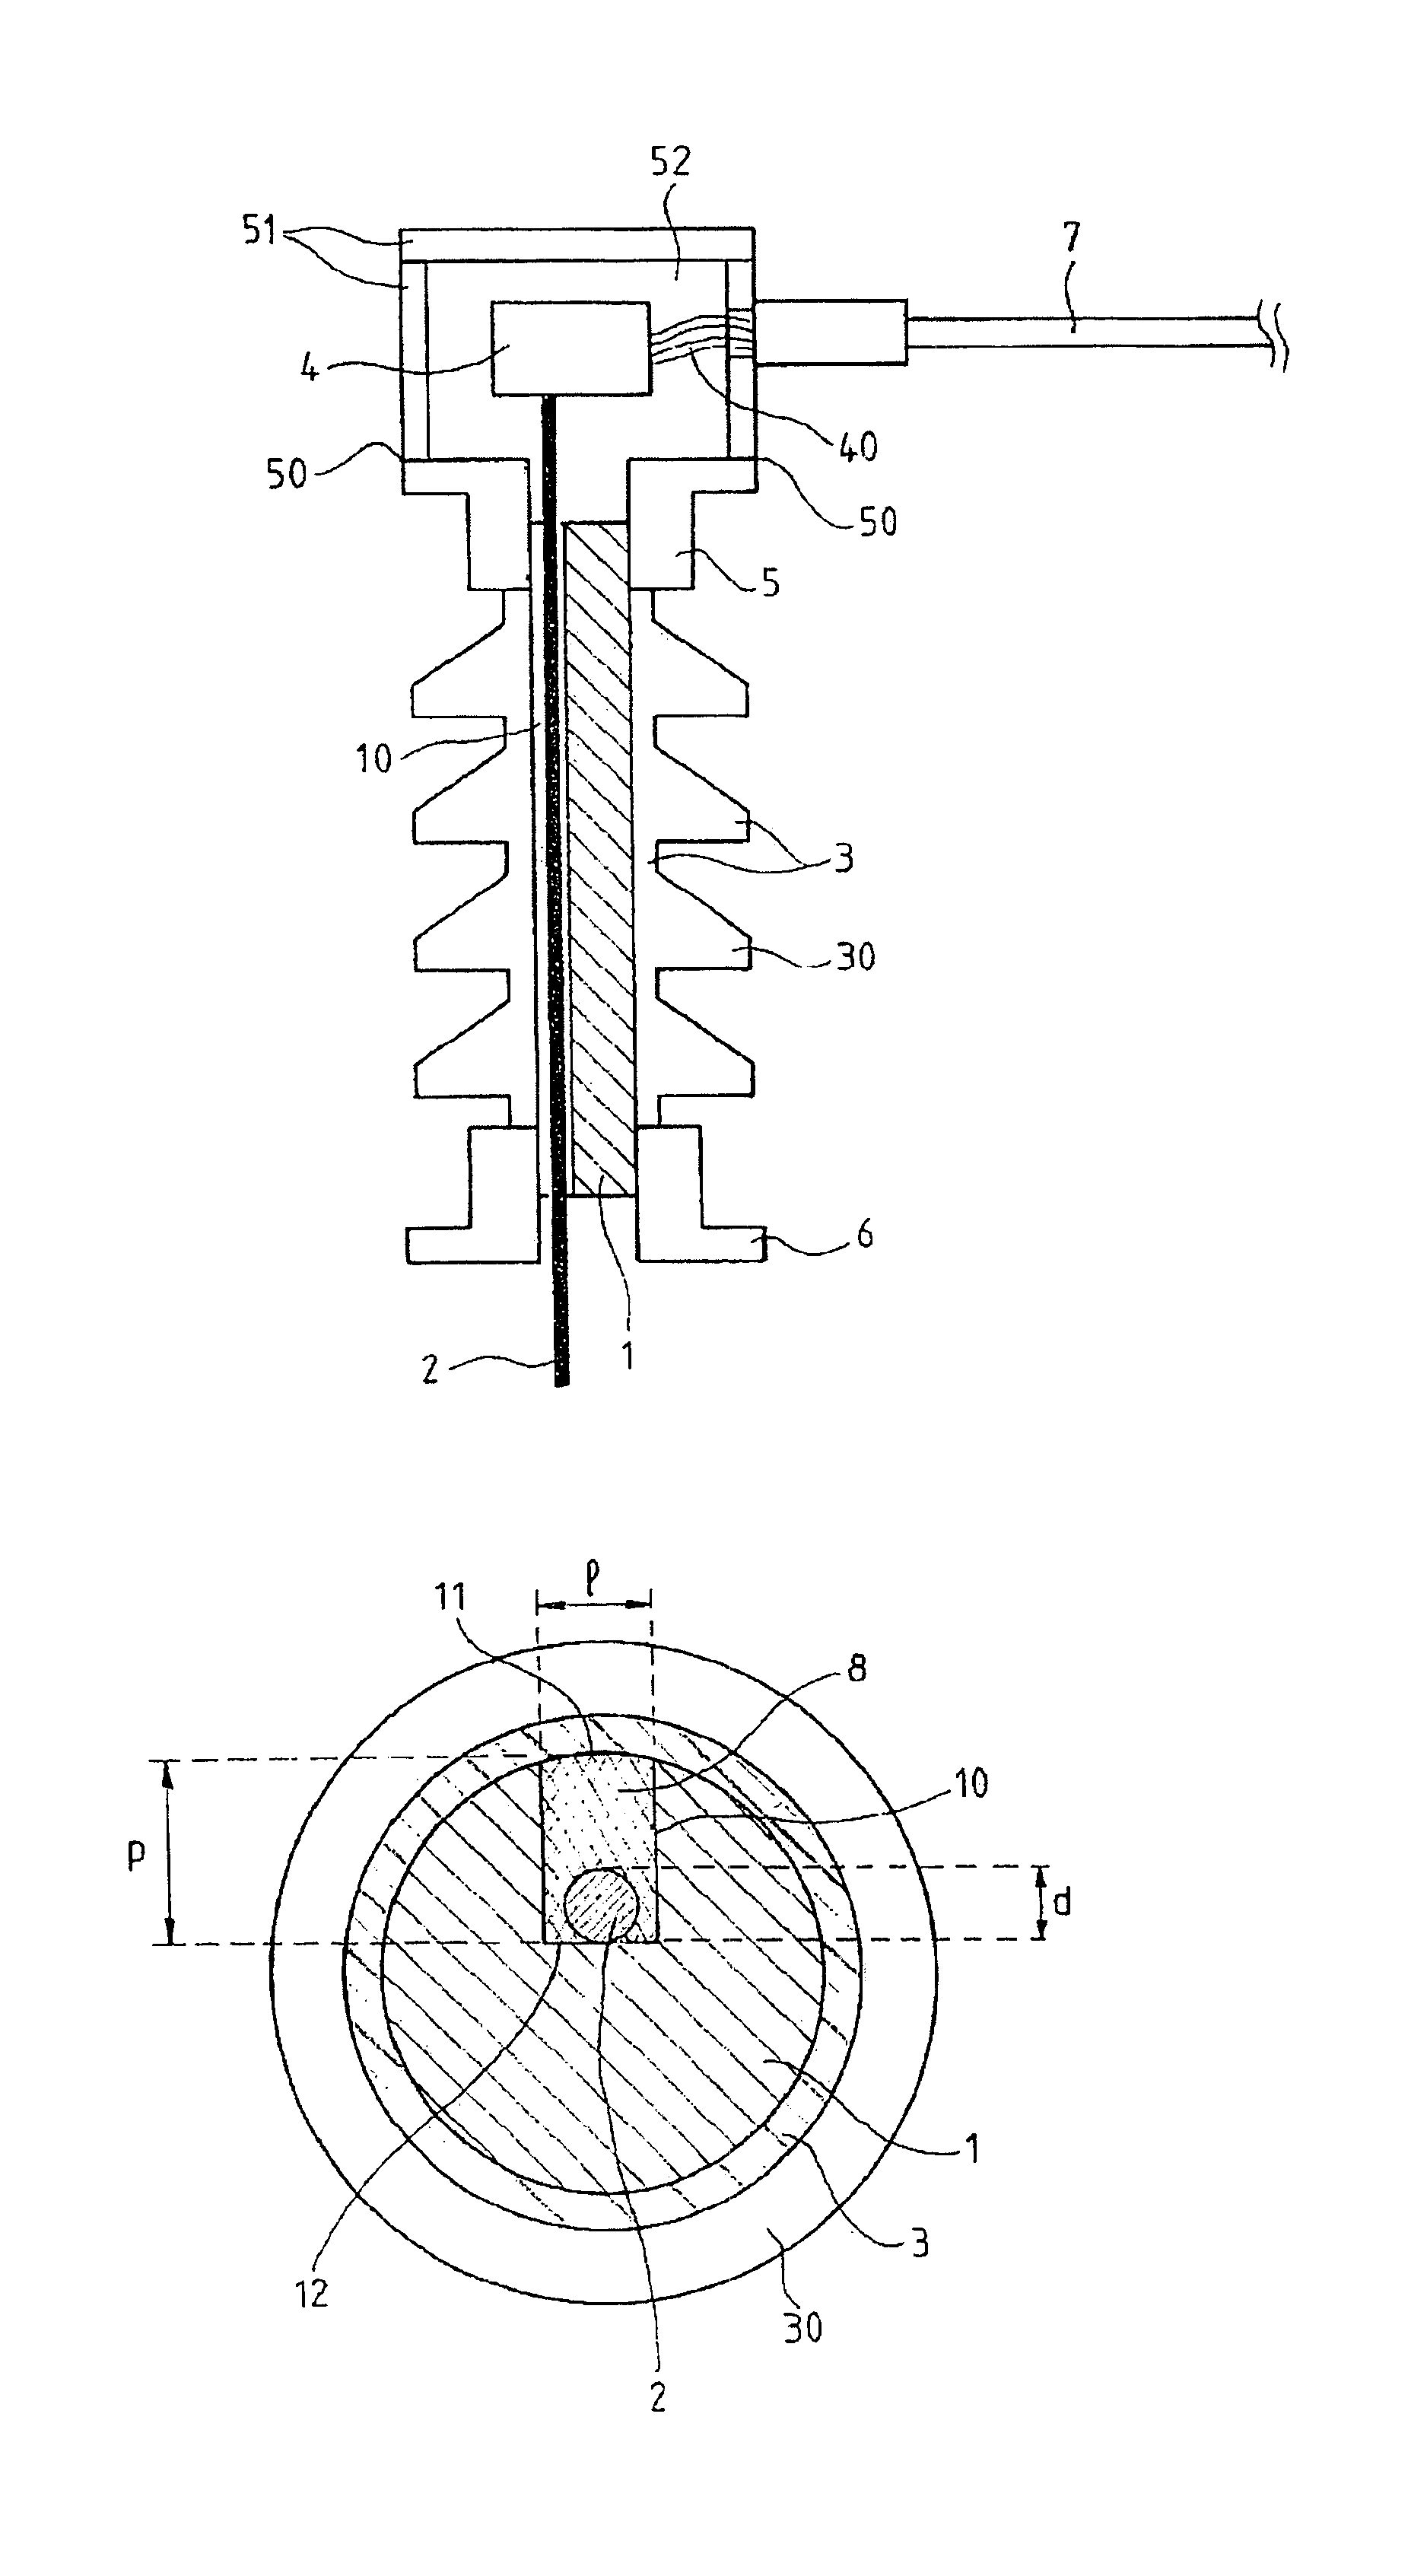 Electrical insulator having a dielectric rod with a slot for receiving an optical fiber cable